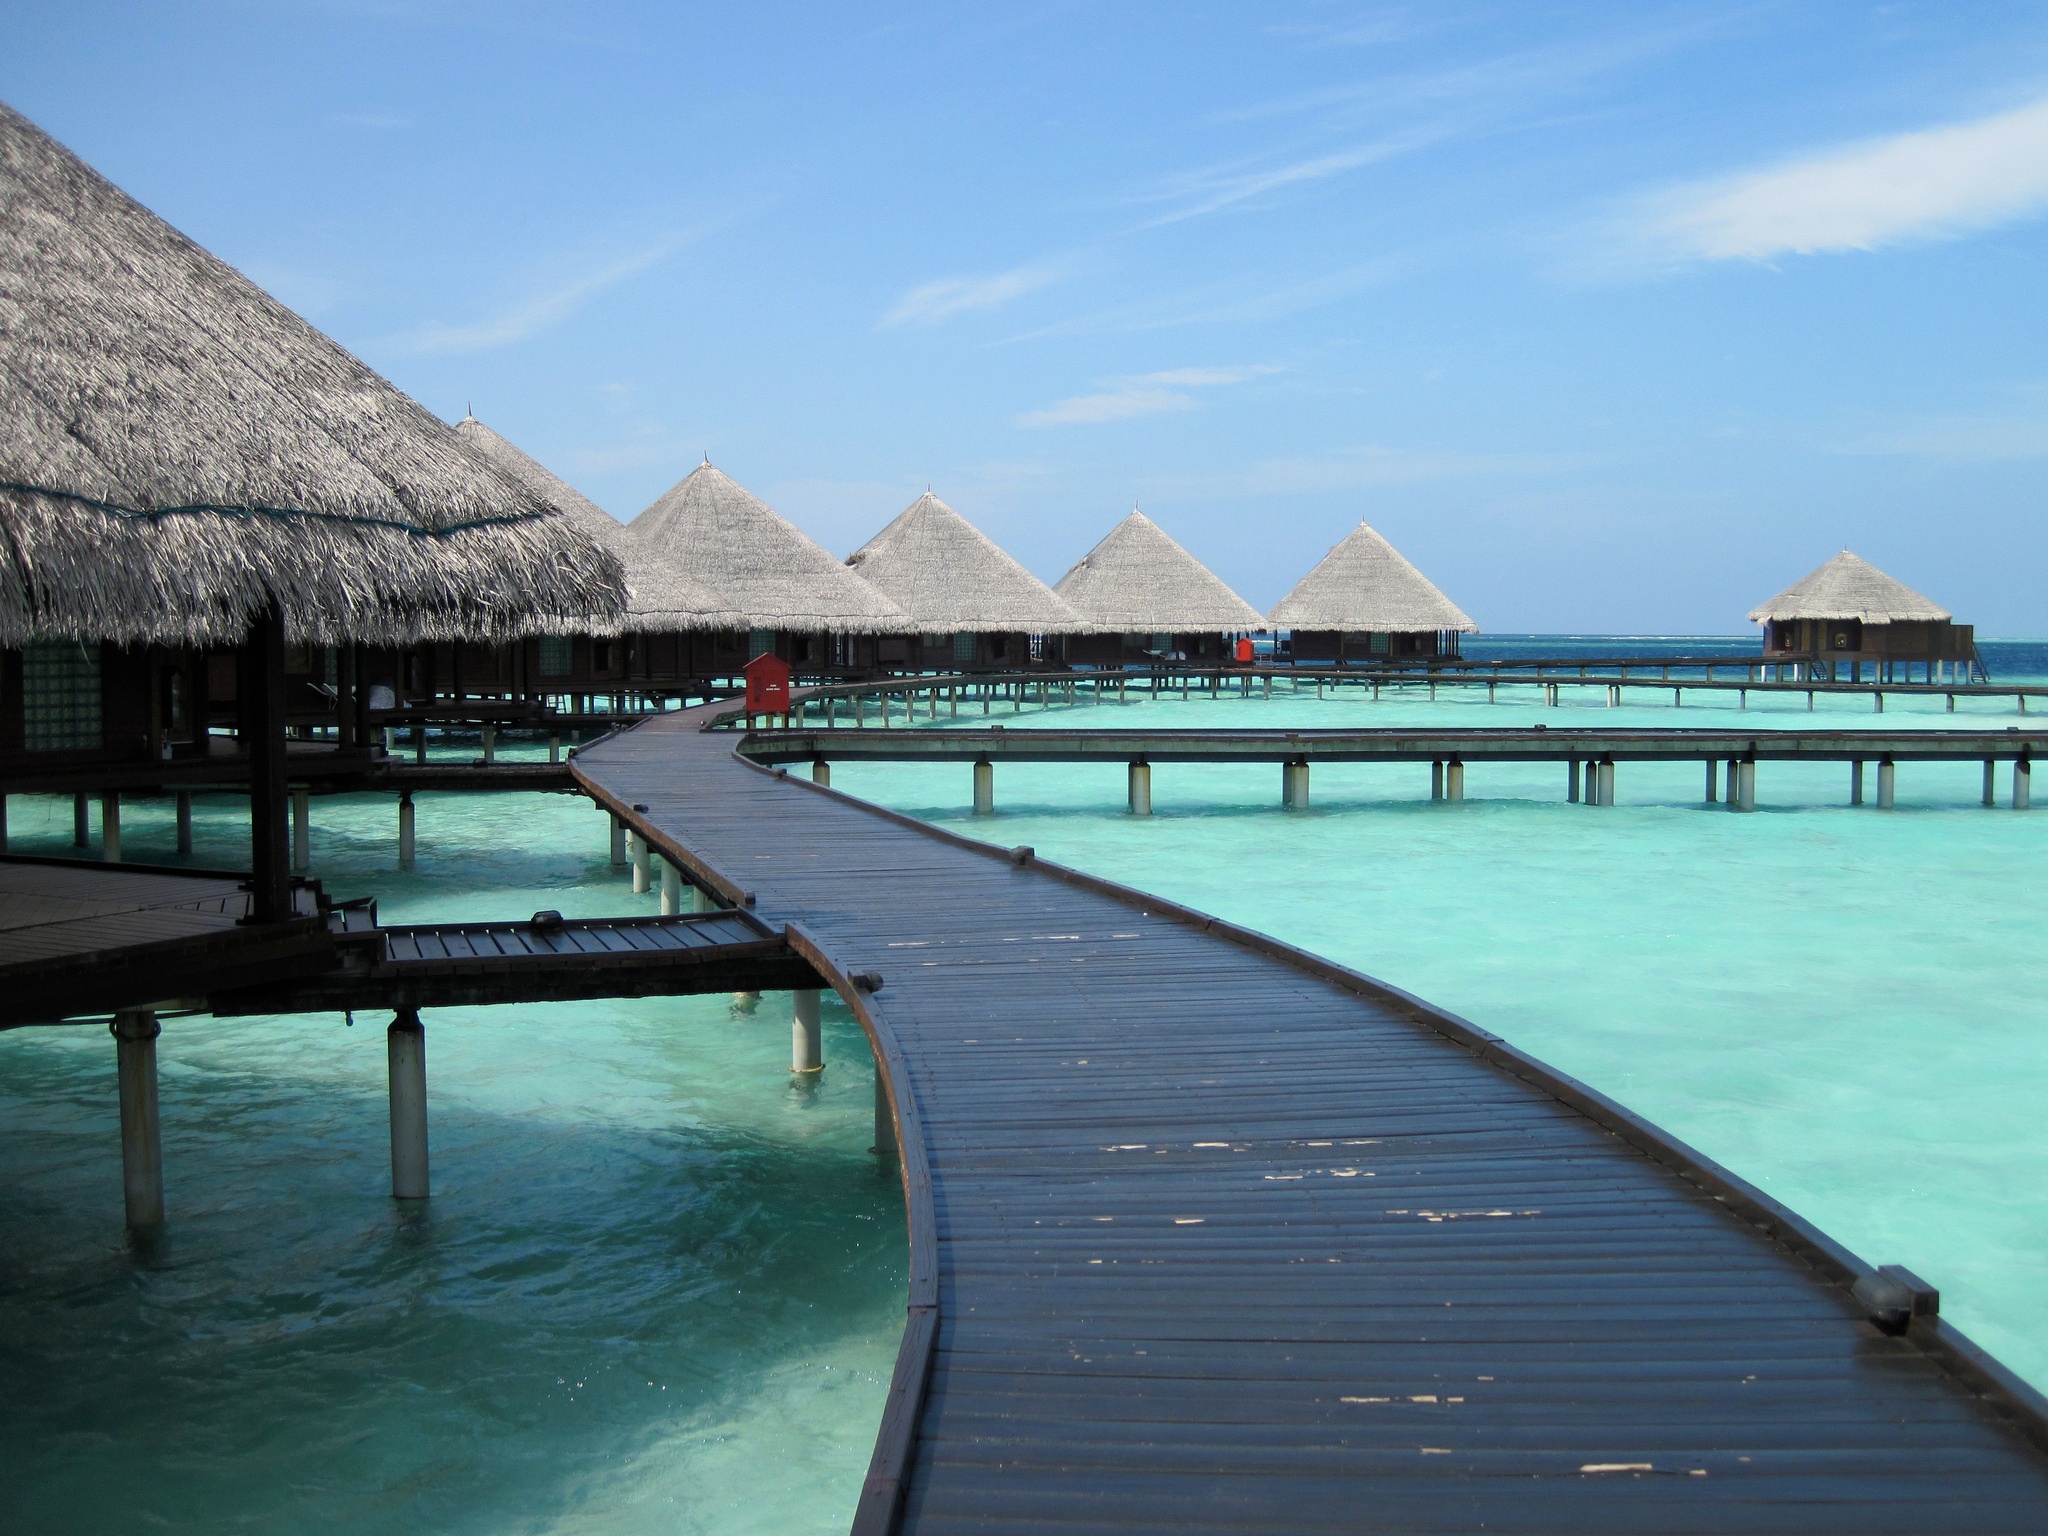 The Maldives came out on top when Agility Research and Strategy asked Chinese millennial travelers where they were headed in the next year. (Selda Eigler/<a href="https://www.flickr.com/photos/selda_eigler/8687784327/">Flickr</a>)